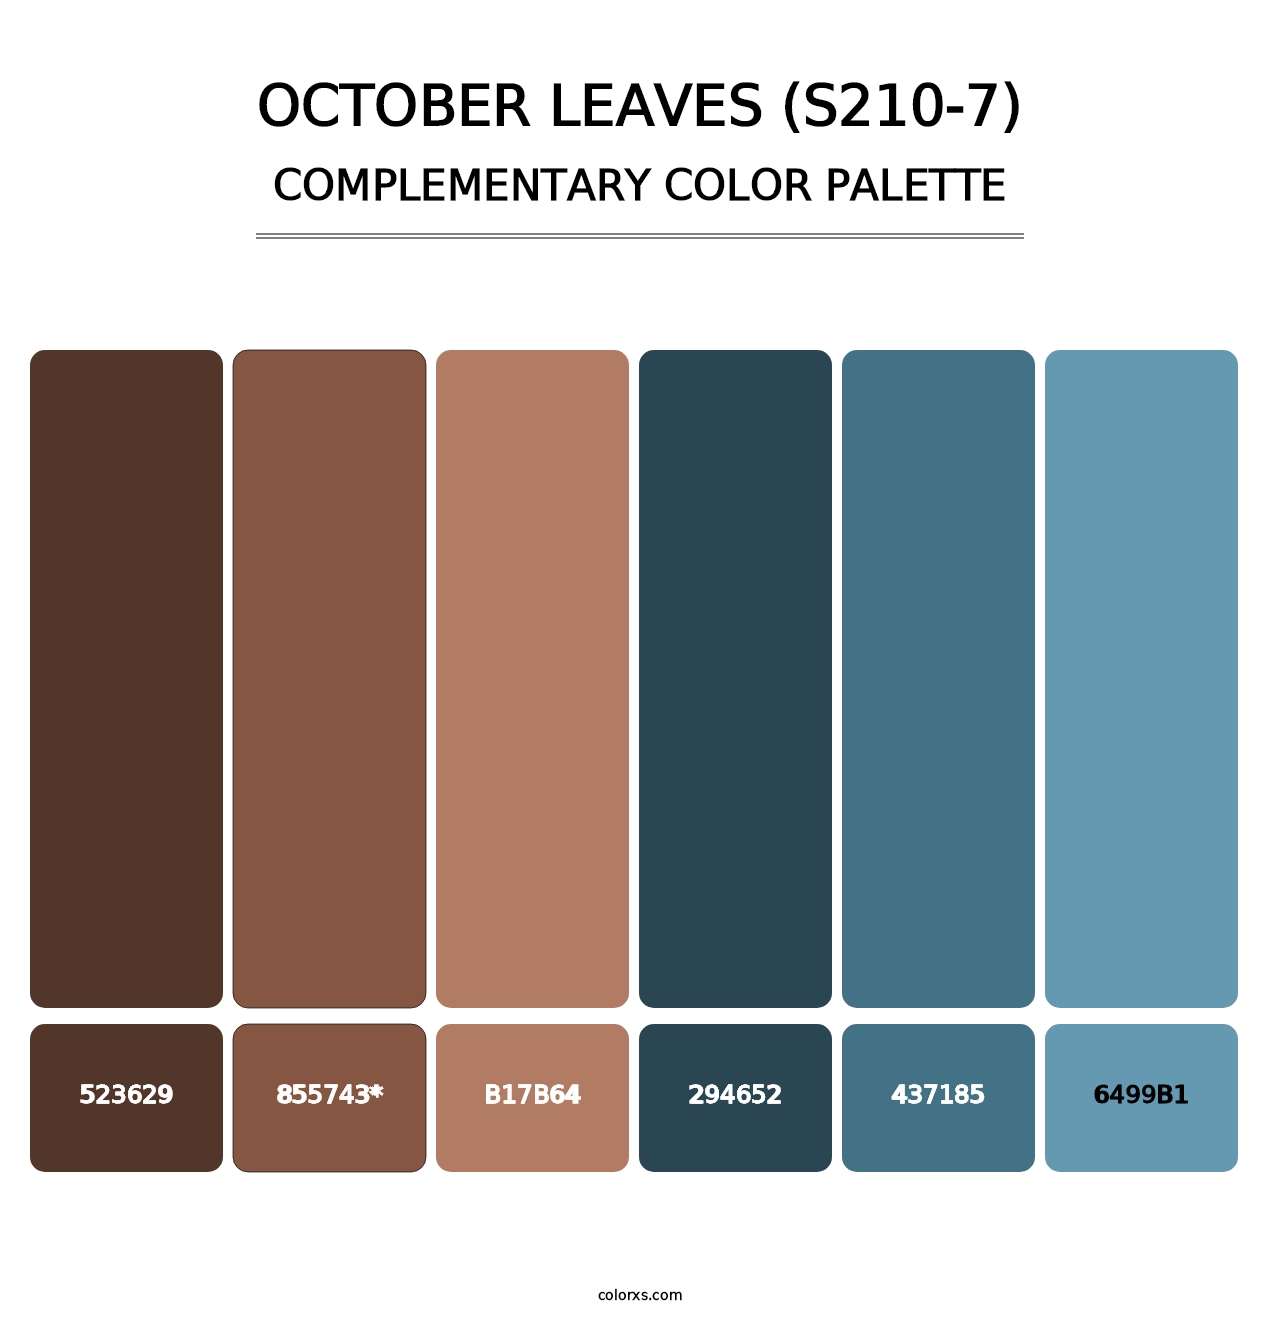 October Leaves (S210-7) - Complementary Color Palette